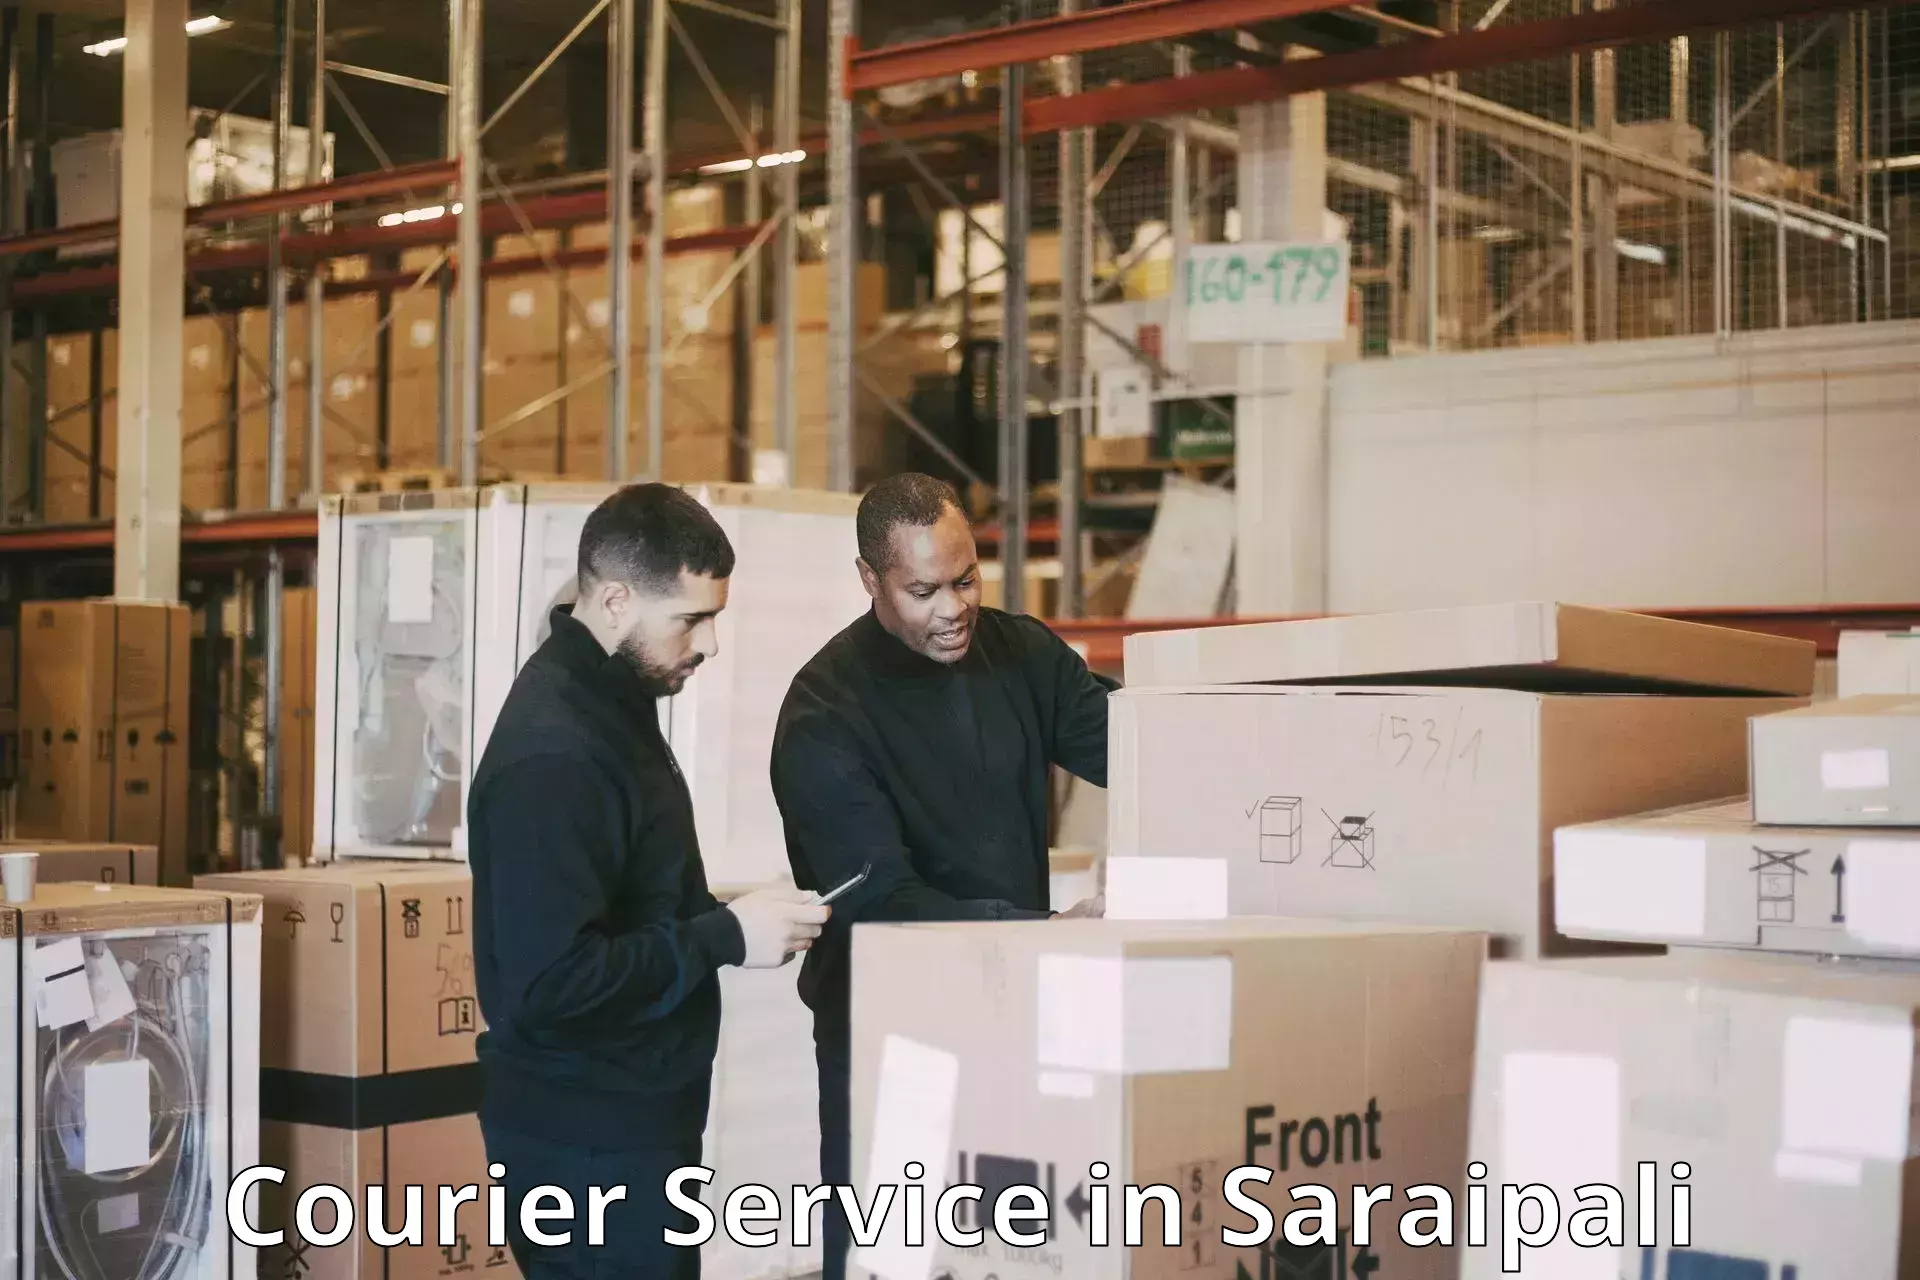 Business delivery service in Saraipali